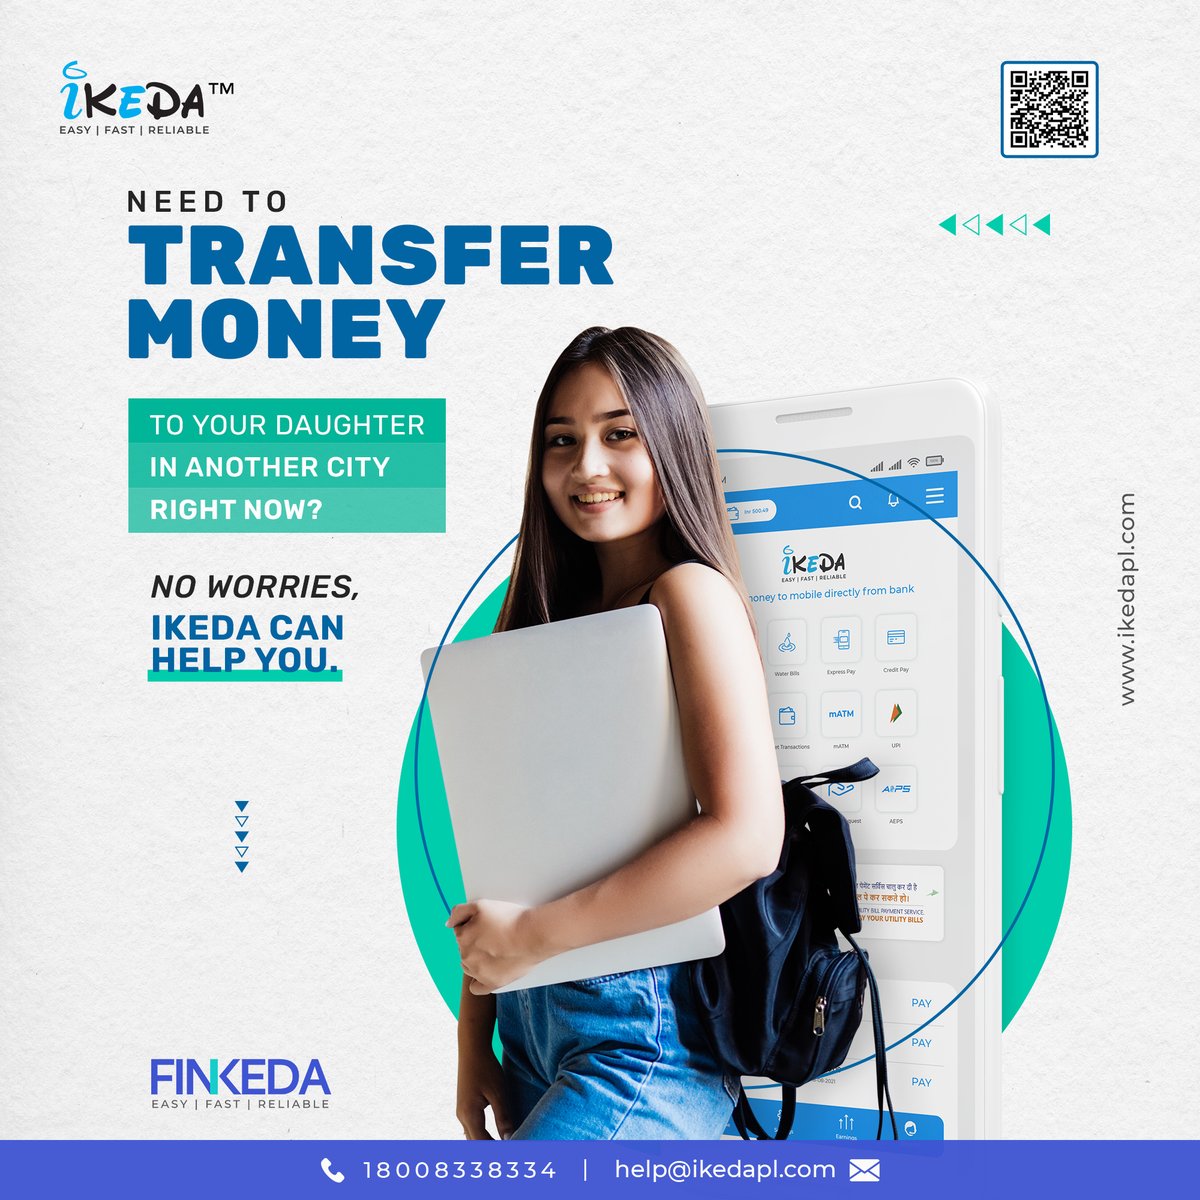 Using Domestic money transfer available at Ikeda to send and receive money at any point of day or night. 

#money #domesticmoneytransfer #DMT #ikeda #ikedapl #finkeda